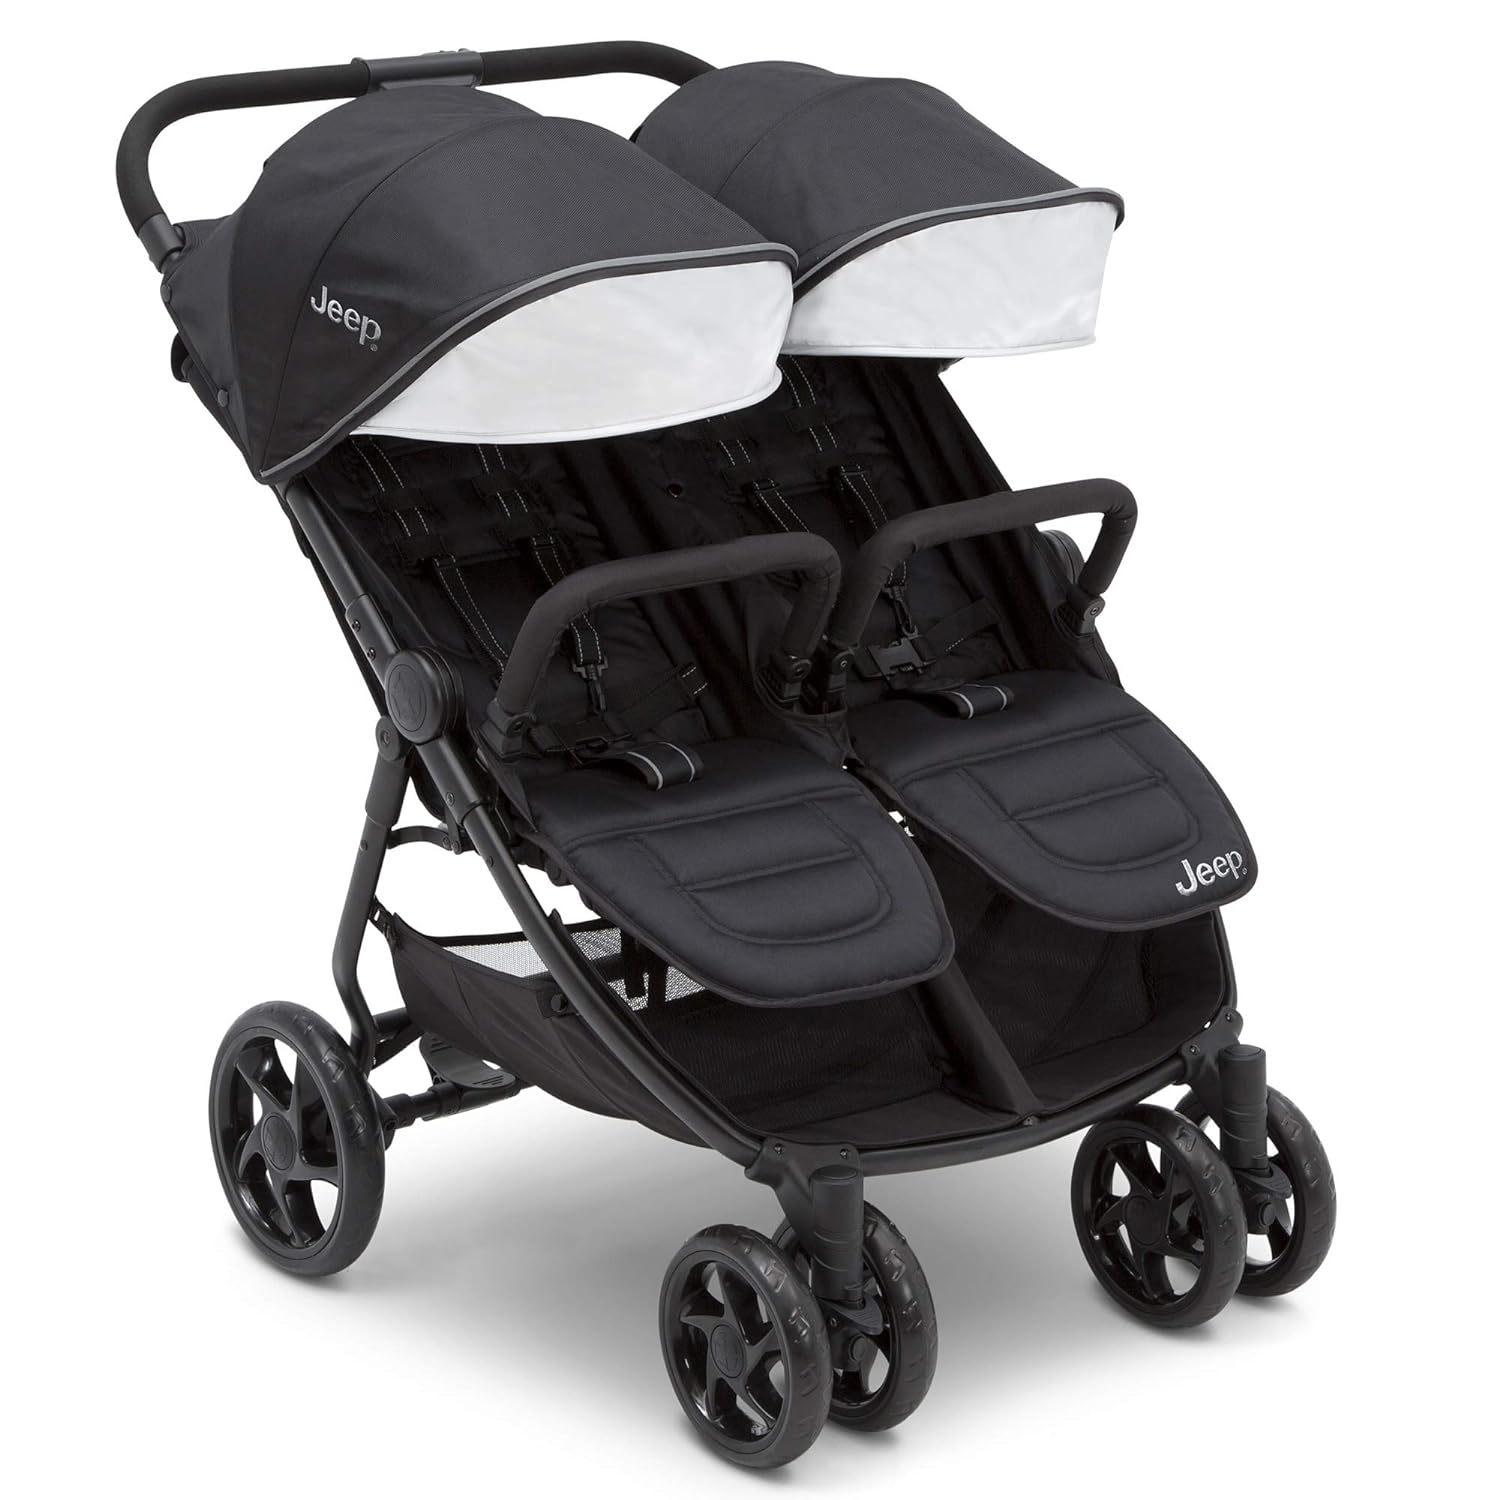 Jeep Destination Ultralight Double Stroller Review